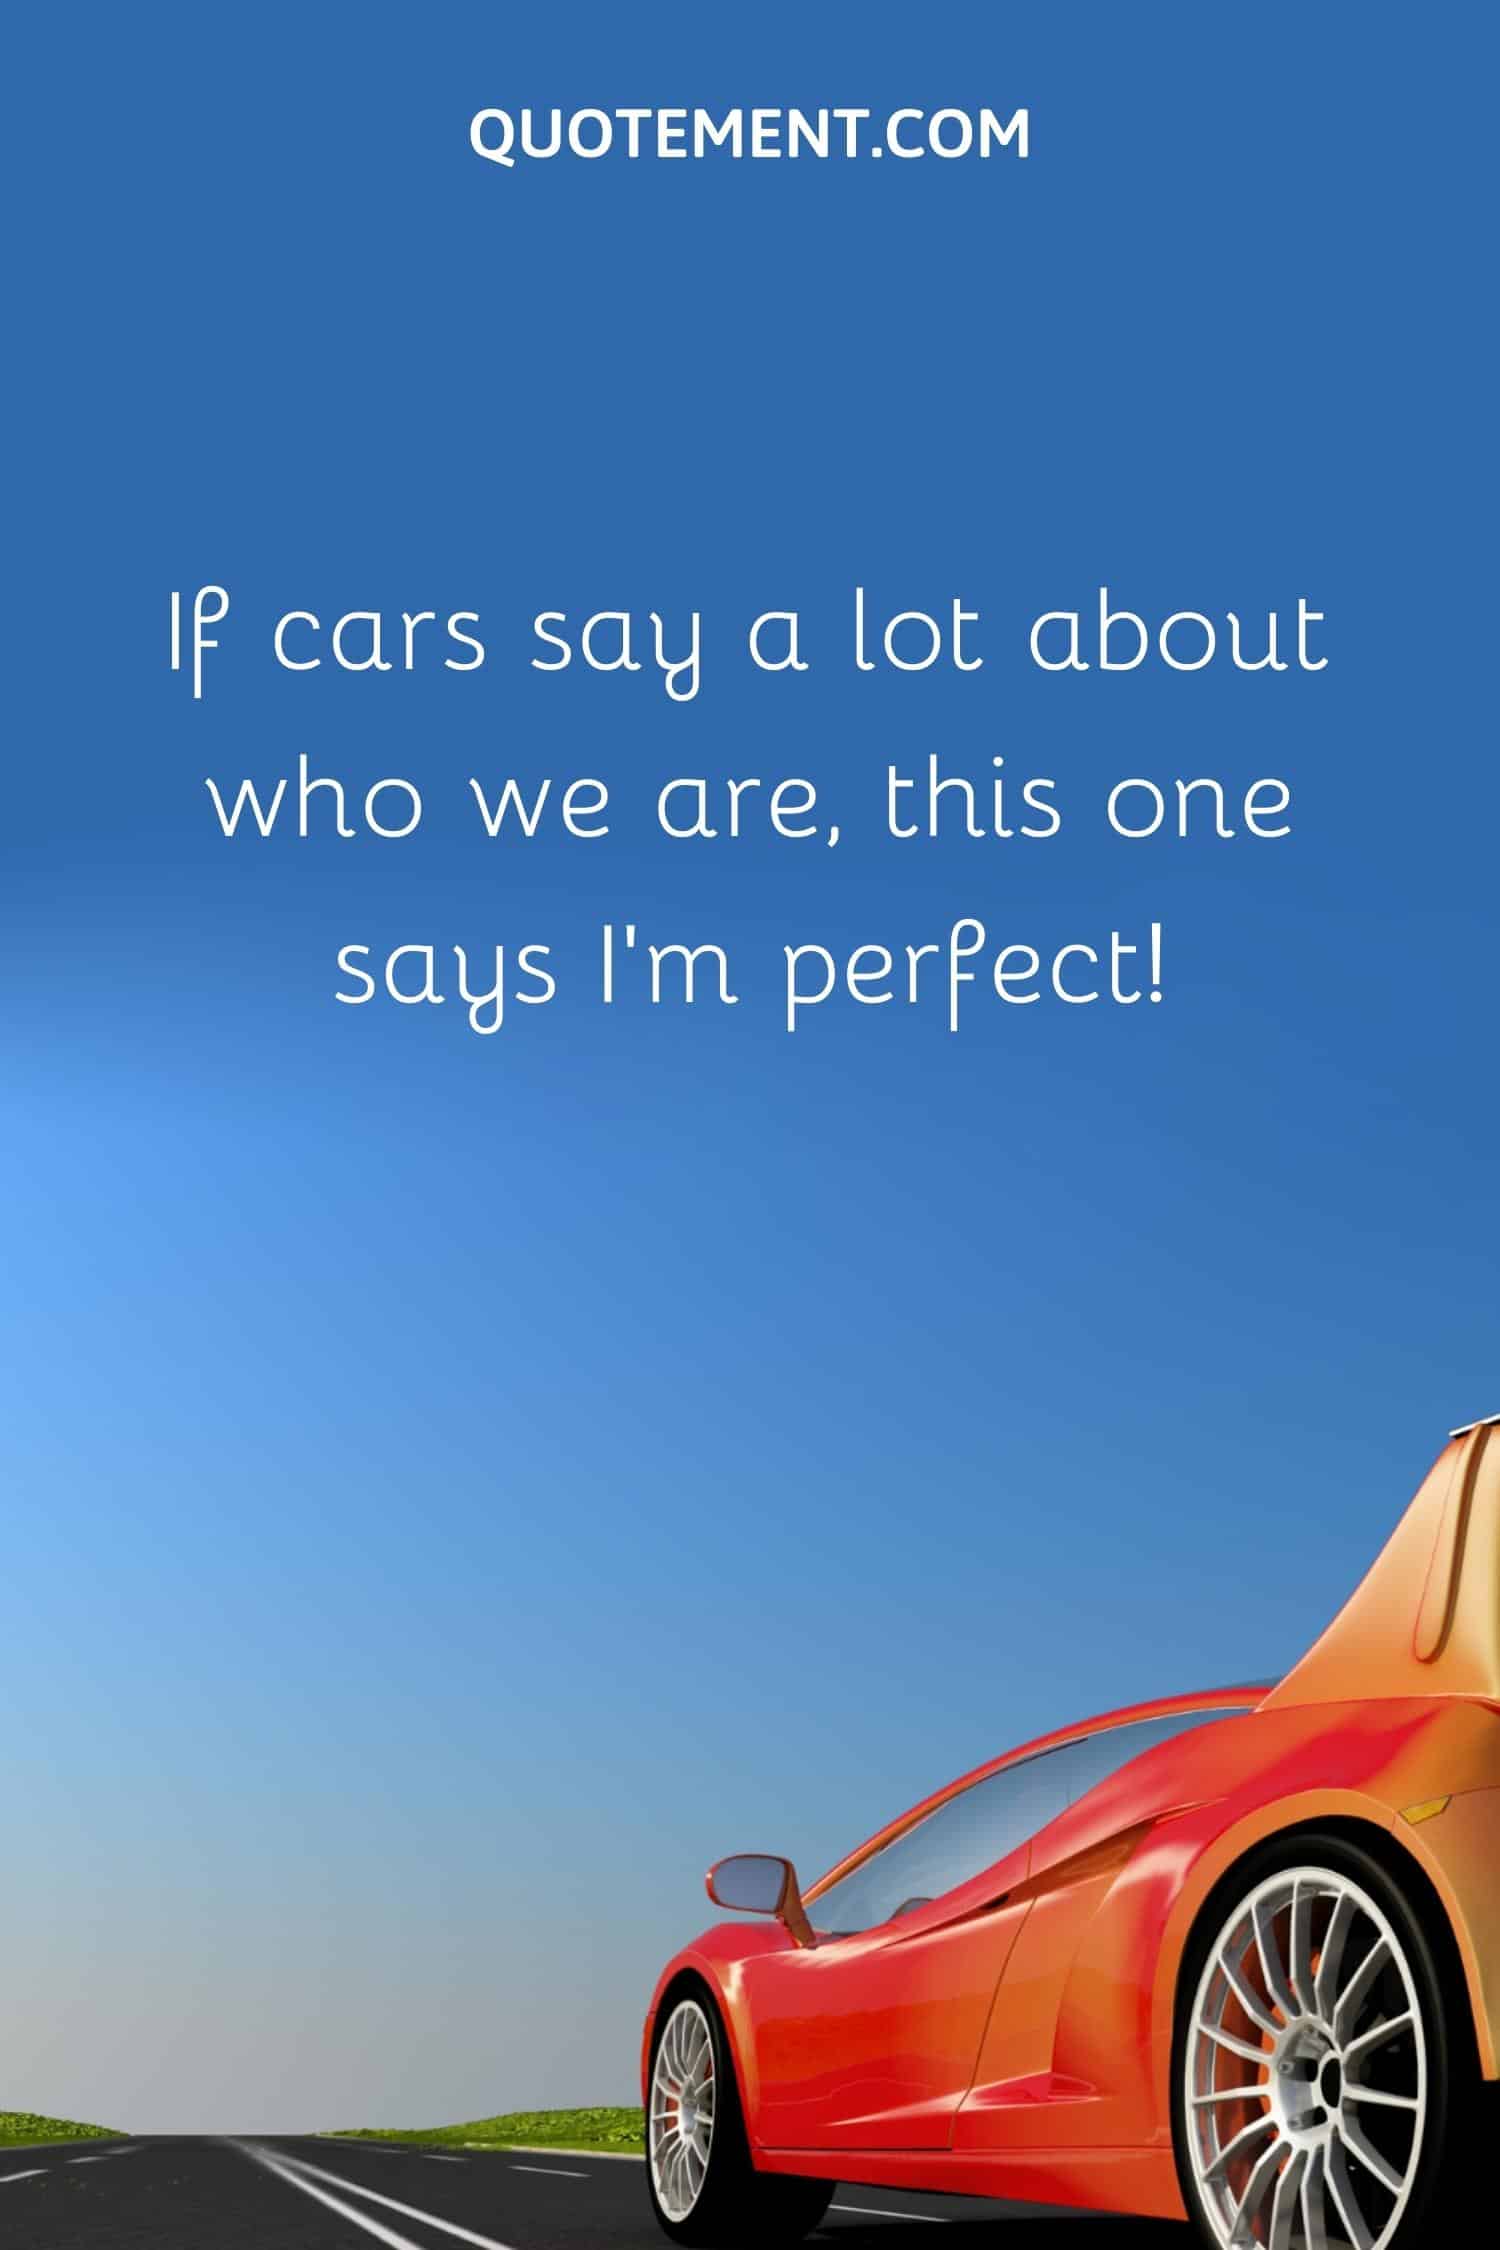 If cars say a lot about who we are, this one says I’m perfect